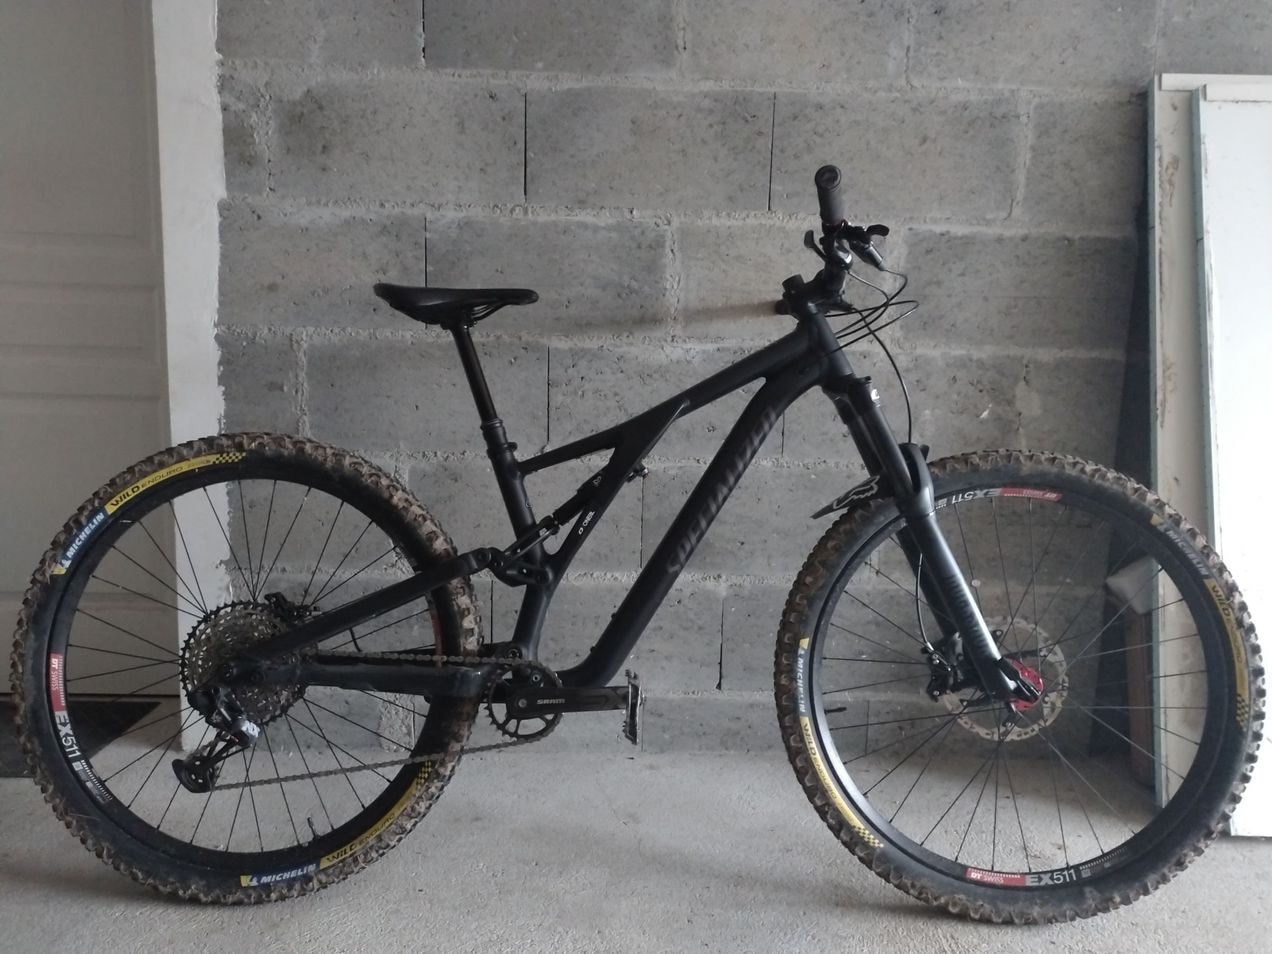 Specialized S-Works Stumpjumper 29